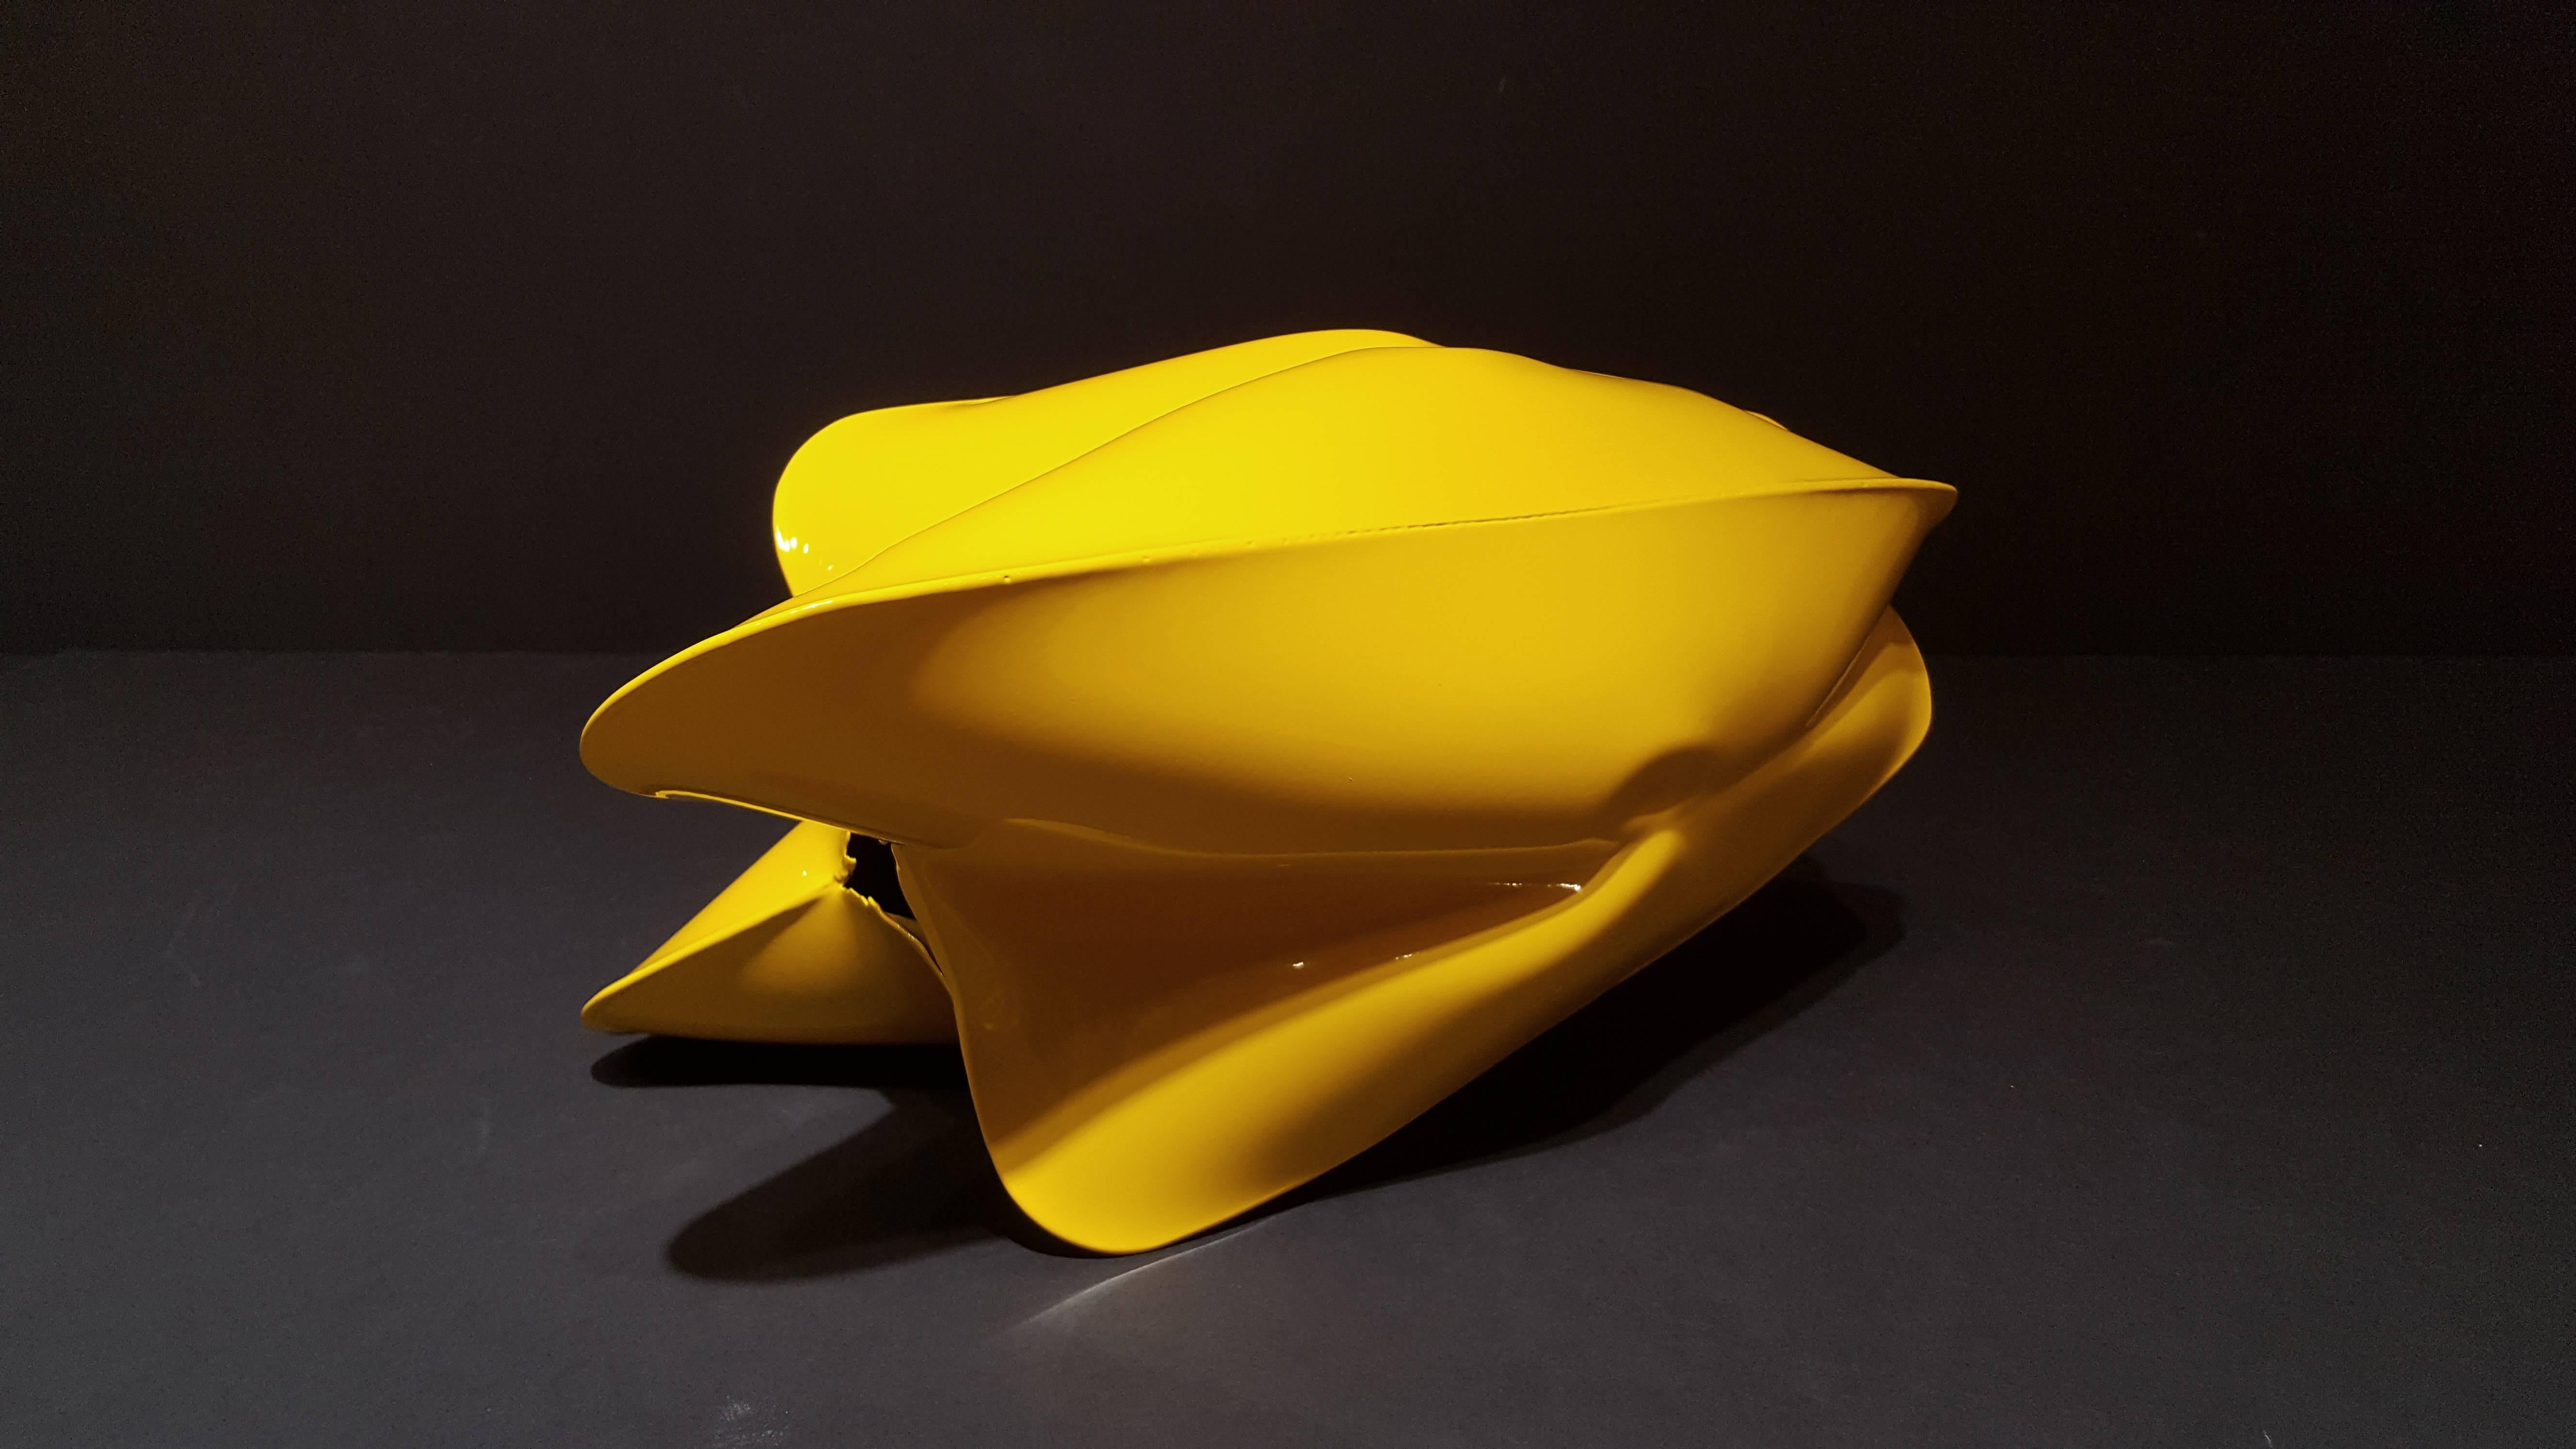 CAT 6 Yellow - Black Abstract Sculpture by Jeremy Thomas